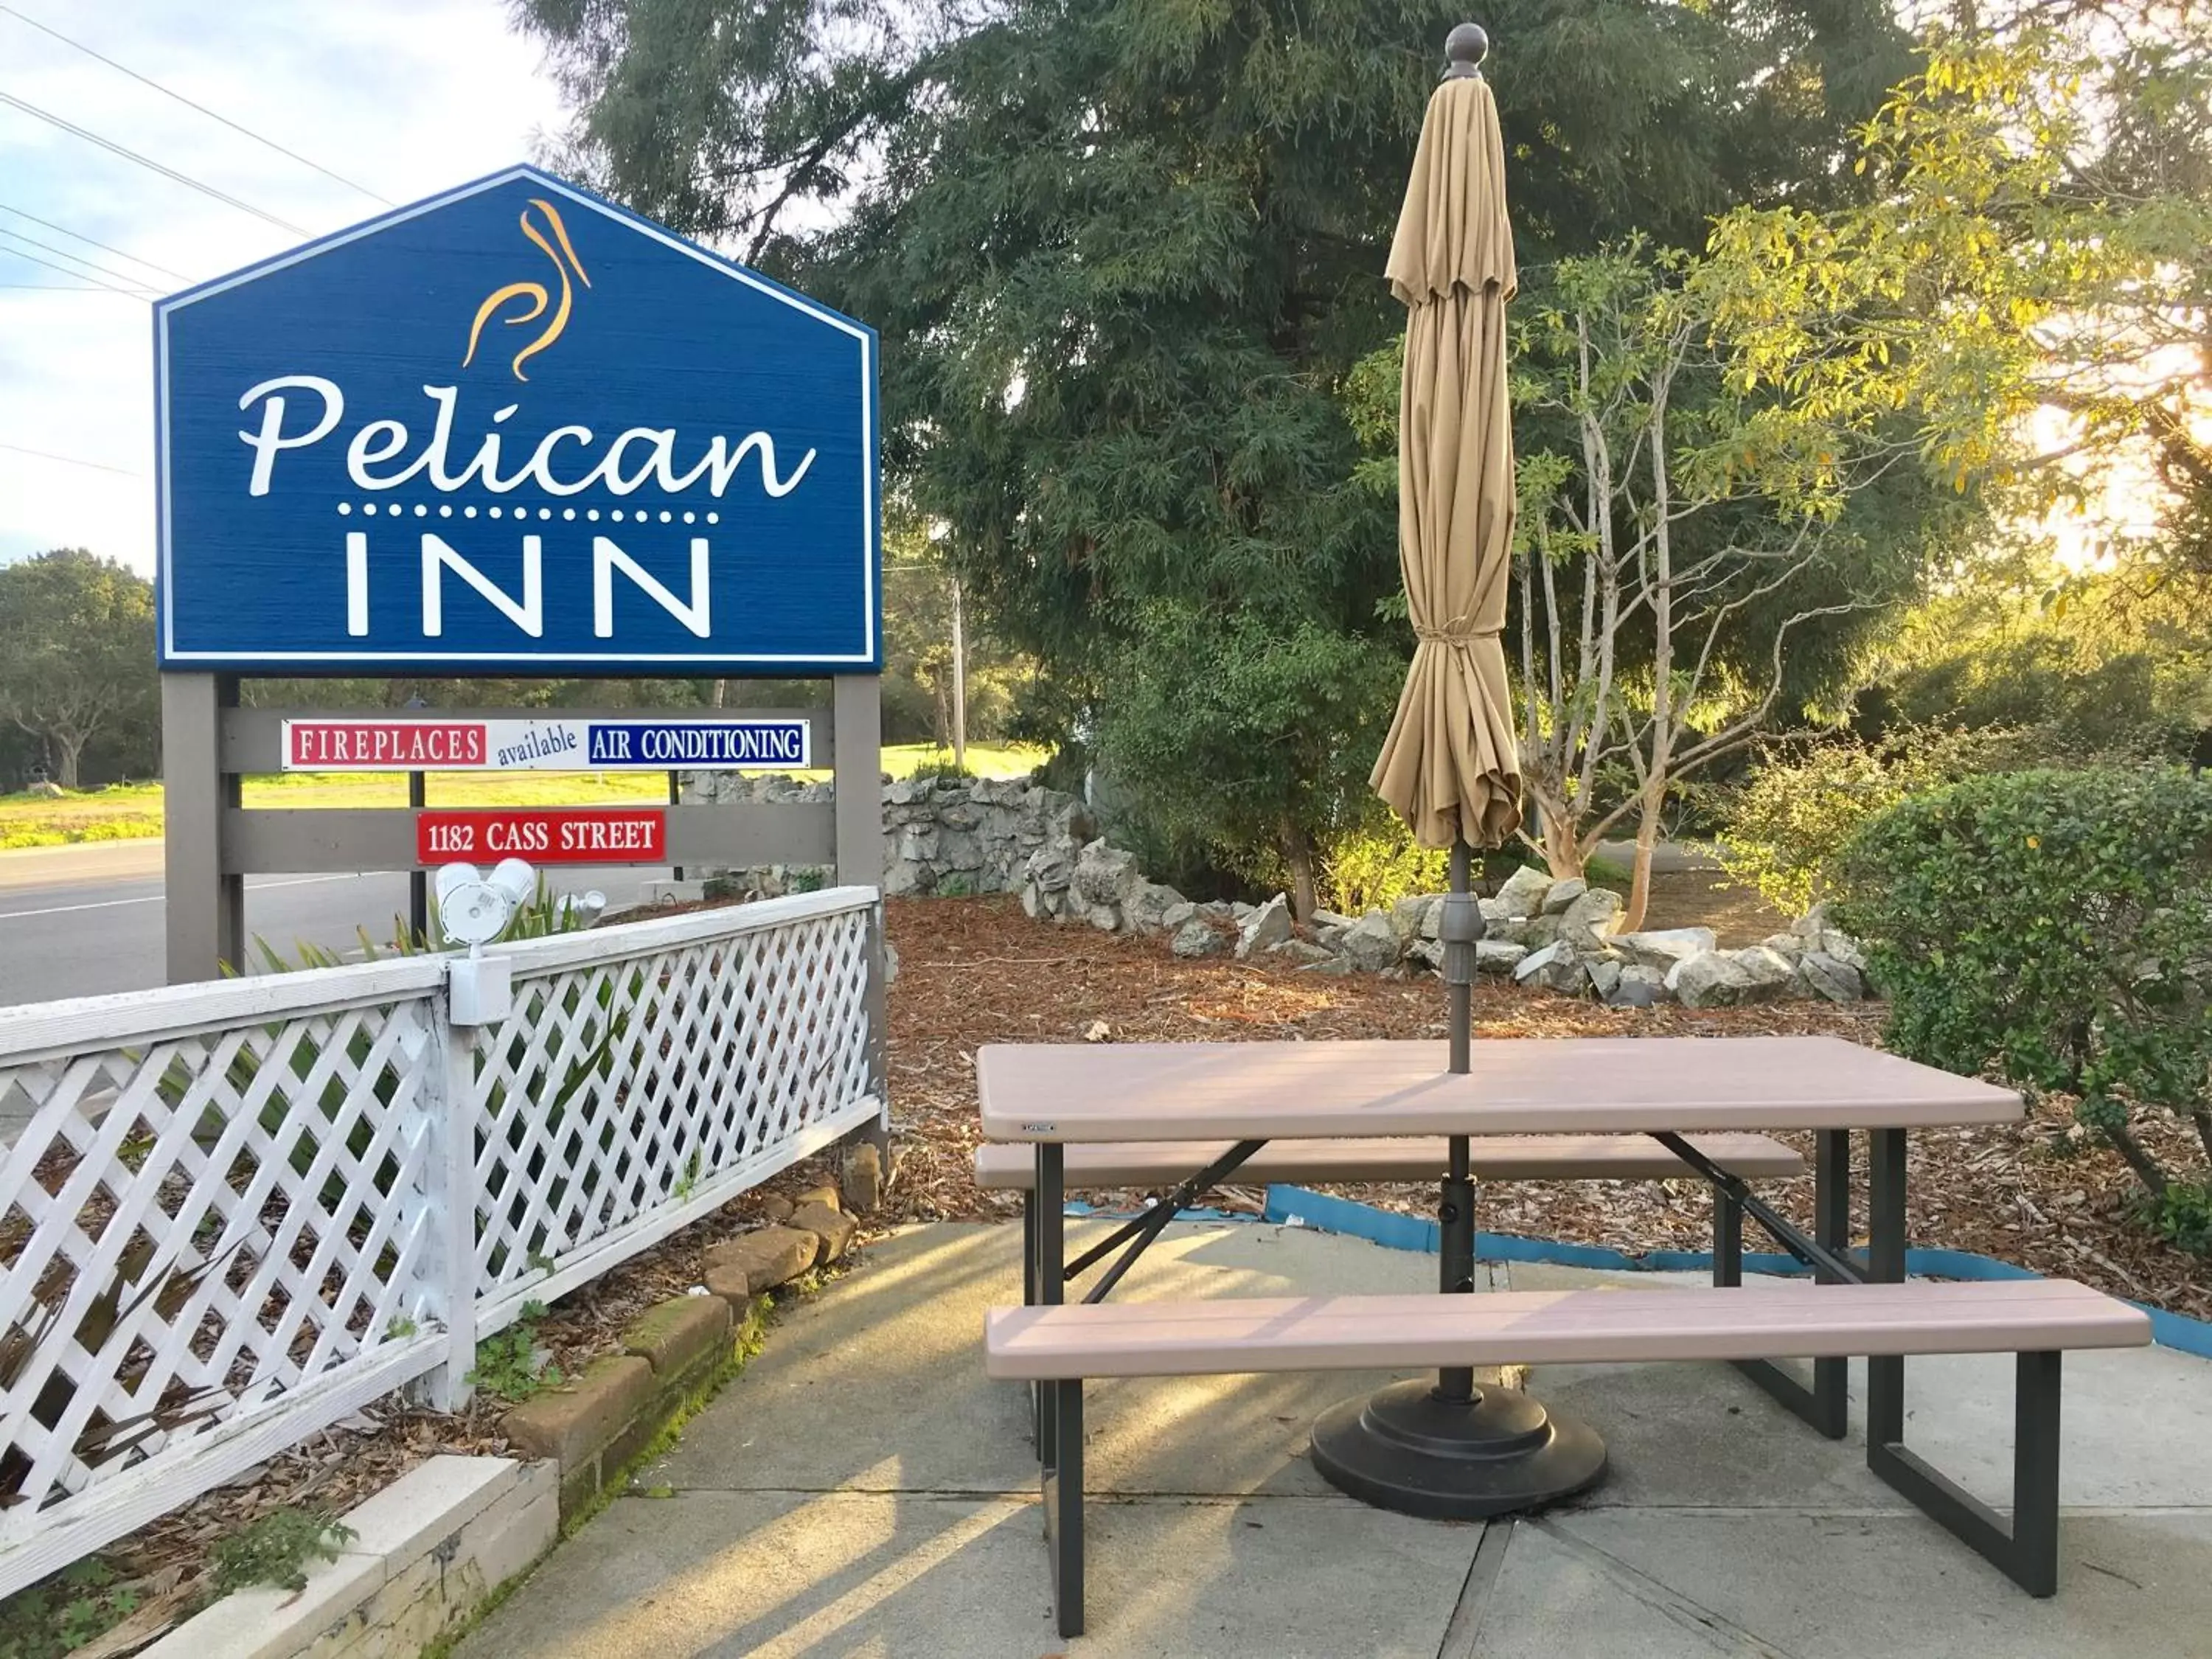 Area and facilities in Pelican Inn